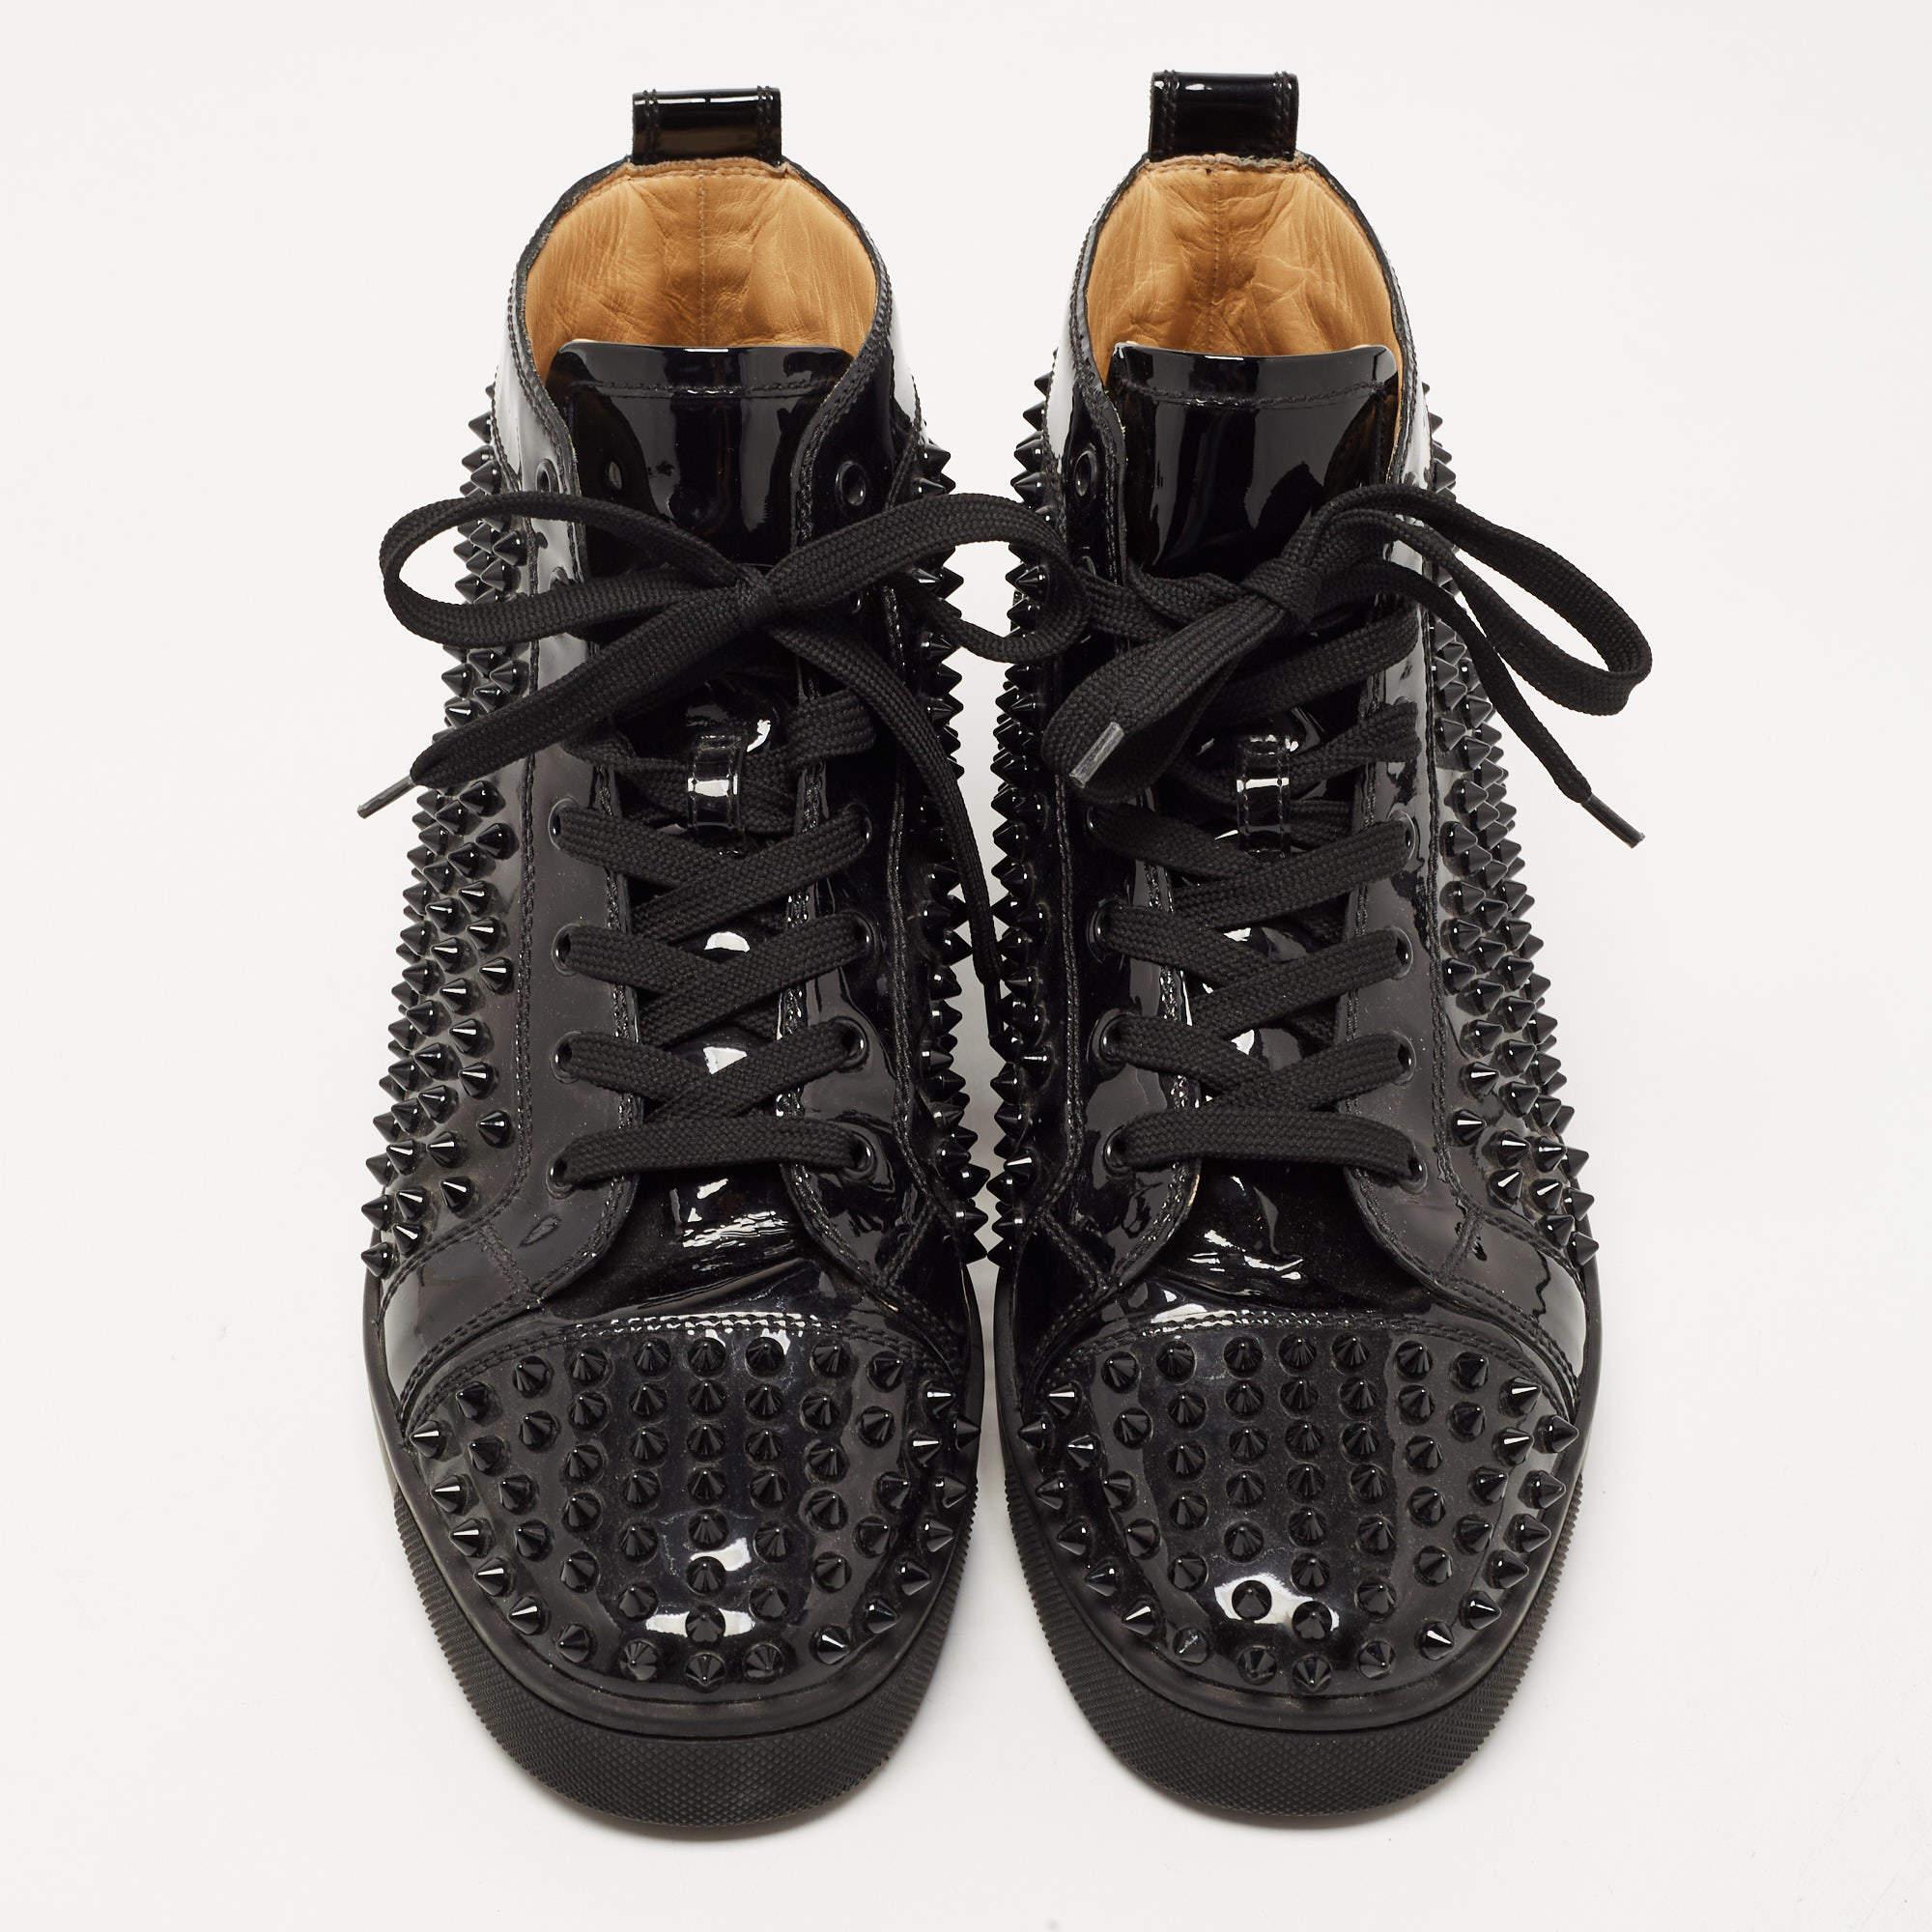 Give your outfit a luxe update with this pair of designer sneakers. The creation is sewn perfectly to help you make a statement in them for a long time.

